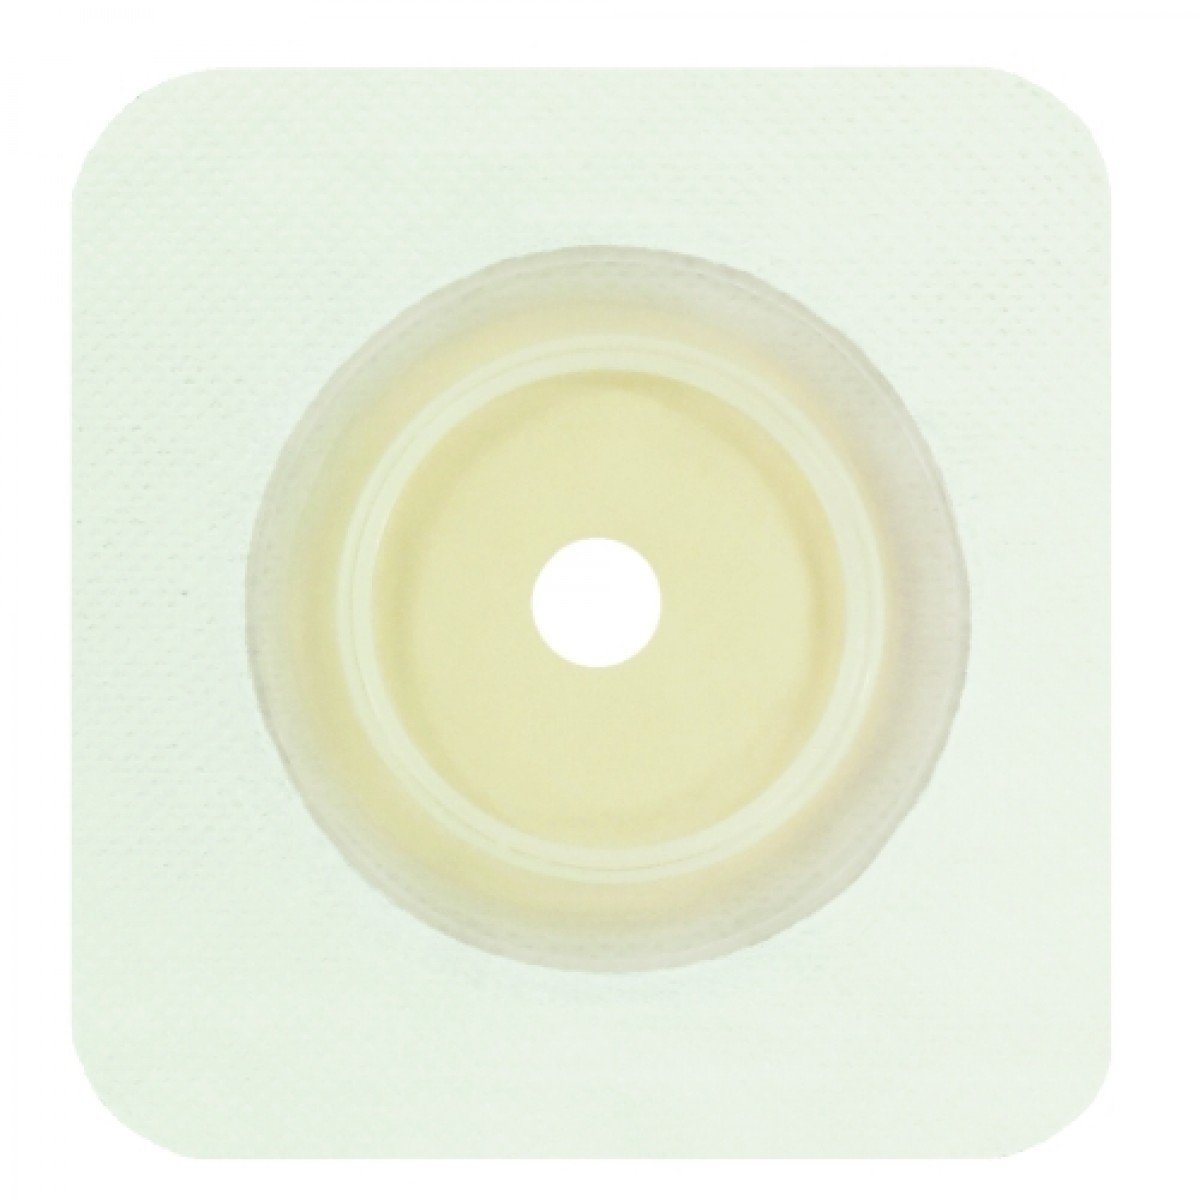 Ostomy Barrier Securi-T® Trim to Fit, Standard Wear Flexible Tape 70 mm Flange Up to 2-1/4 Inch Opening 5 X 5 Inch